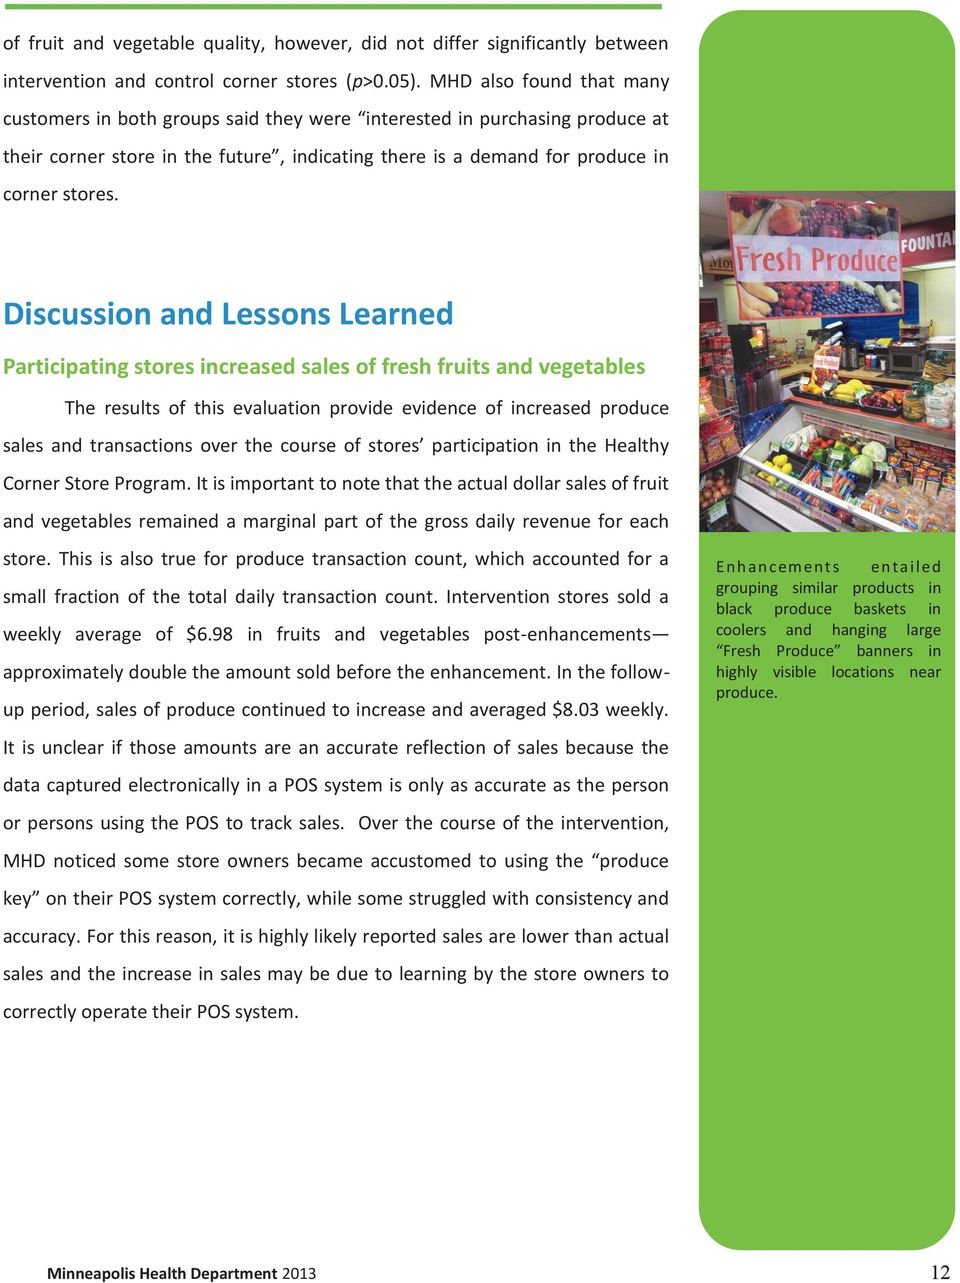 Discussion and Lessons Learned Participating stores increased sales of fresh fruits and vegetables The results of this evaluation provide evidence of increased produce sales and transactions over the